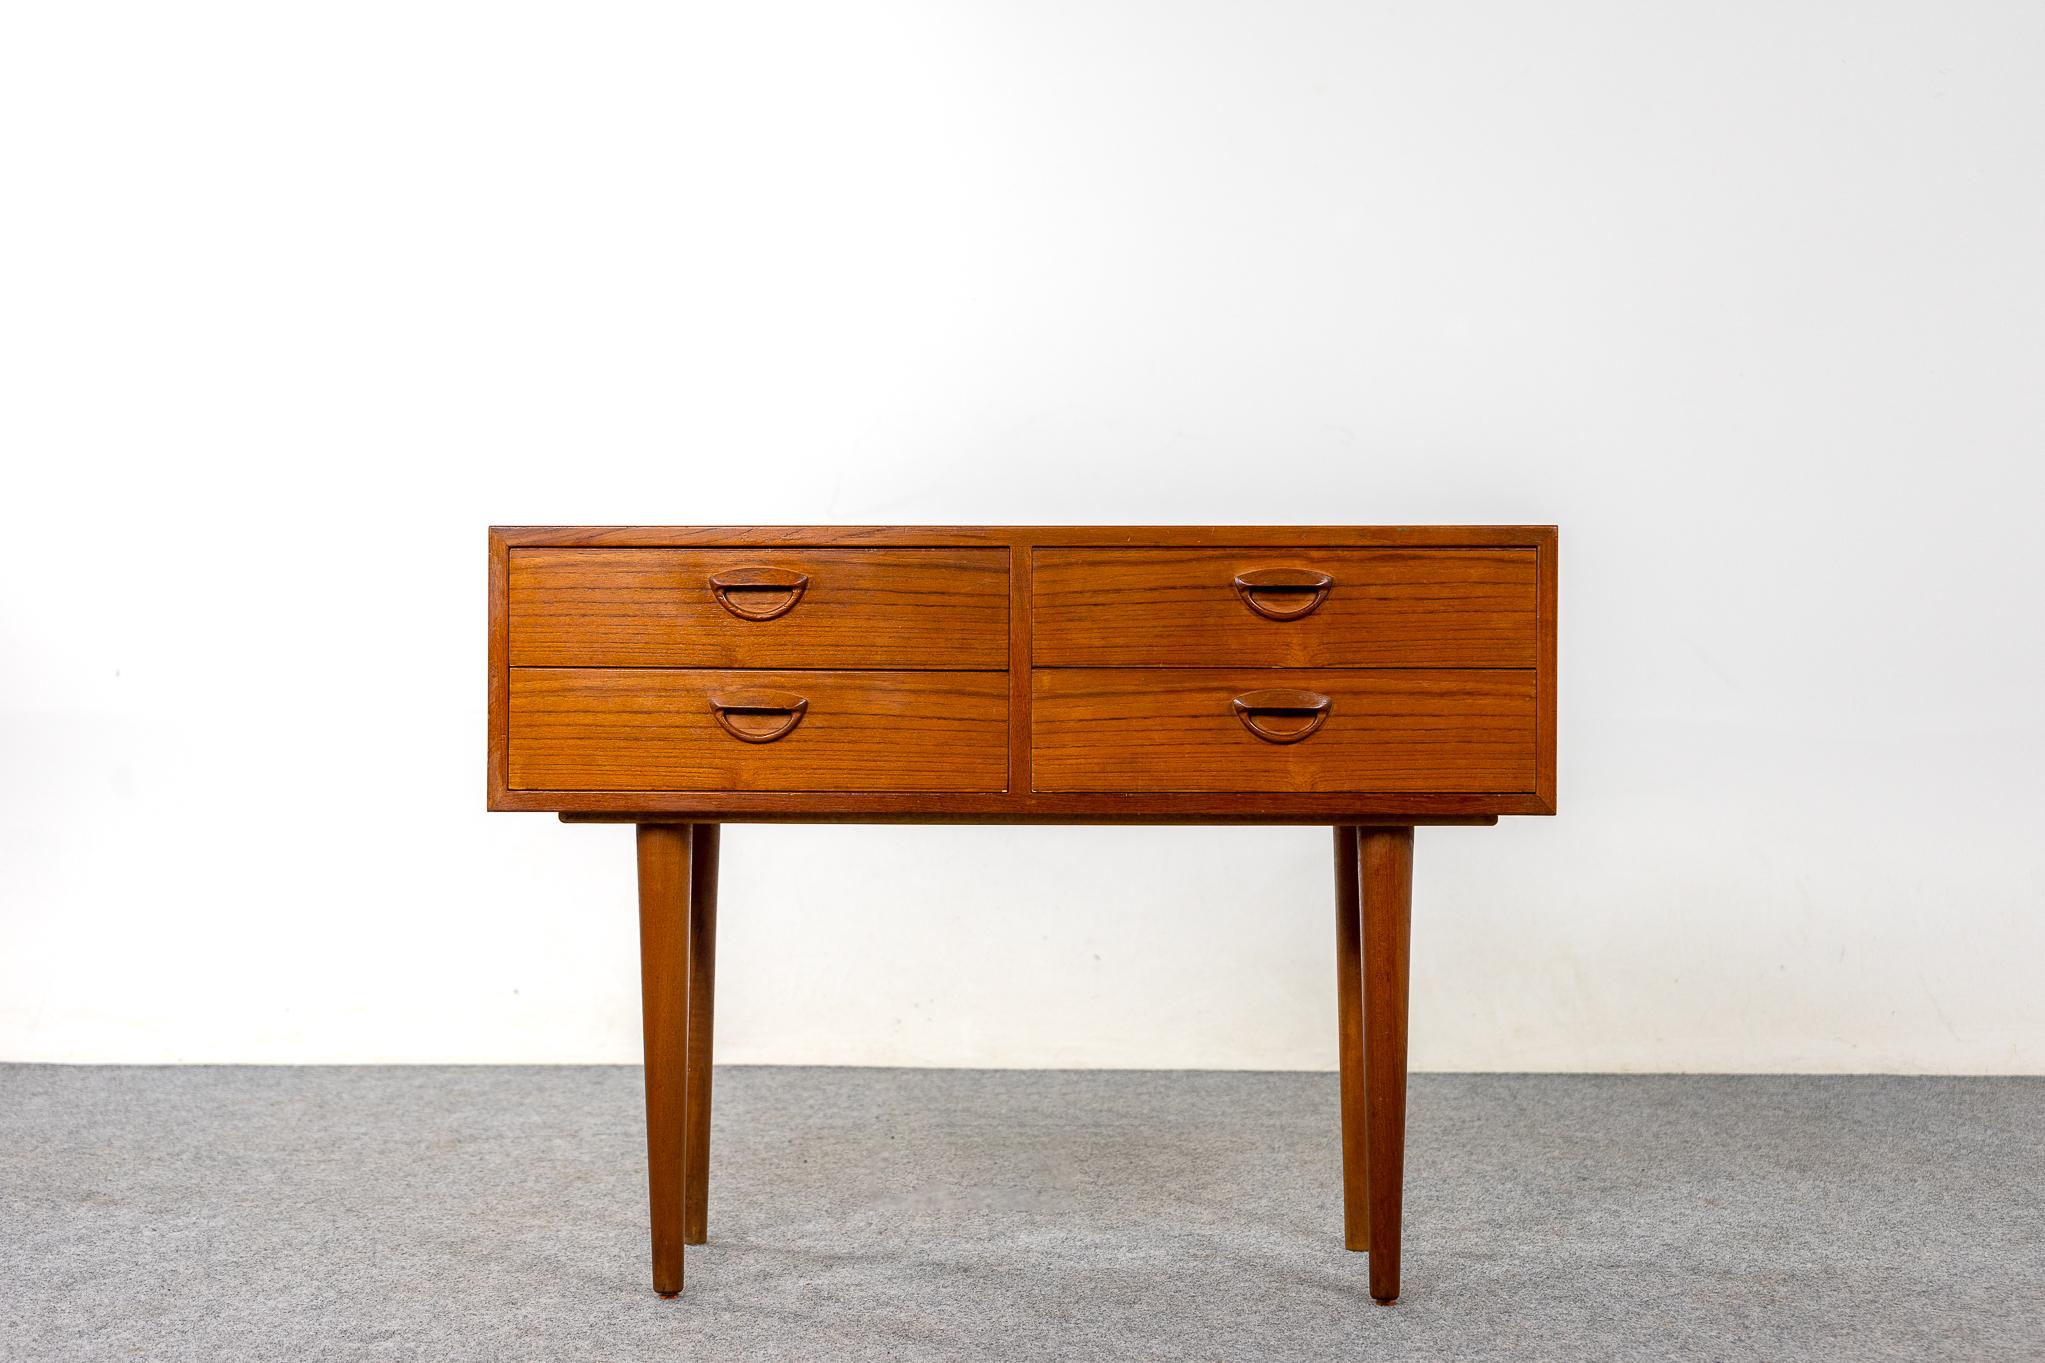 Teak mid century bedside table, circa 1960's. Beautifully veneered case rests on slender, tapered, removable legs. Four dovetailed drawers offer storage for small items.

Unrestored item, some marks consistent with age.